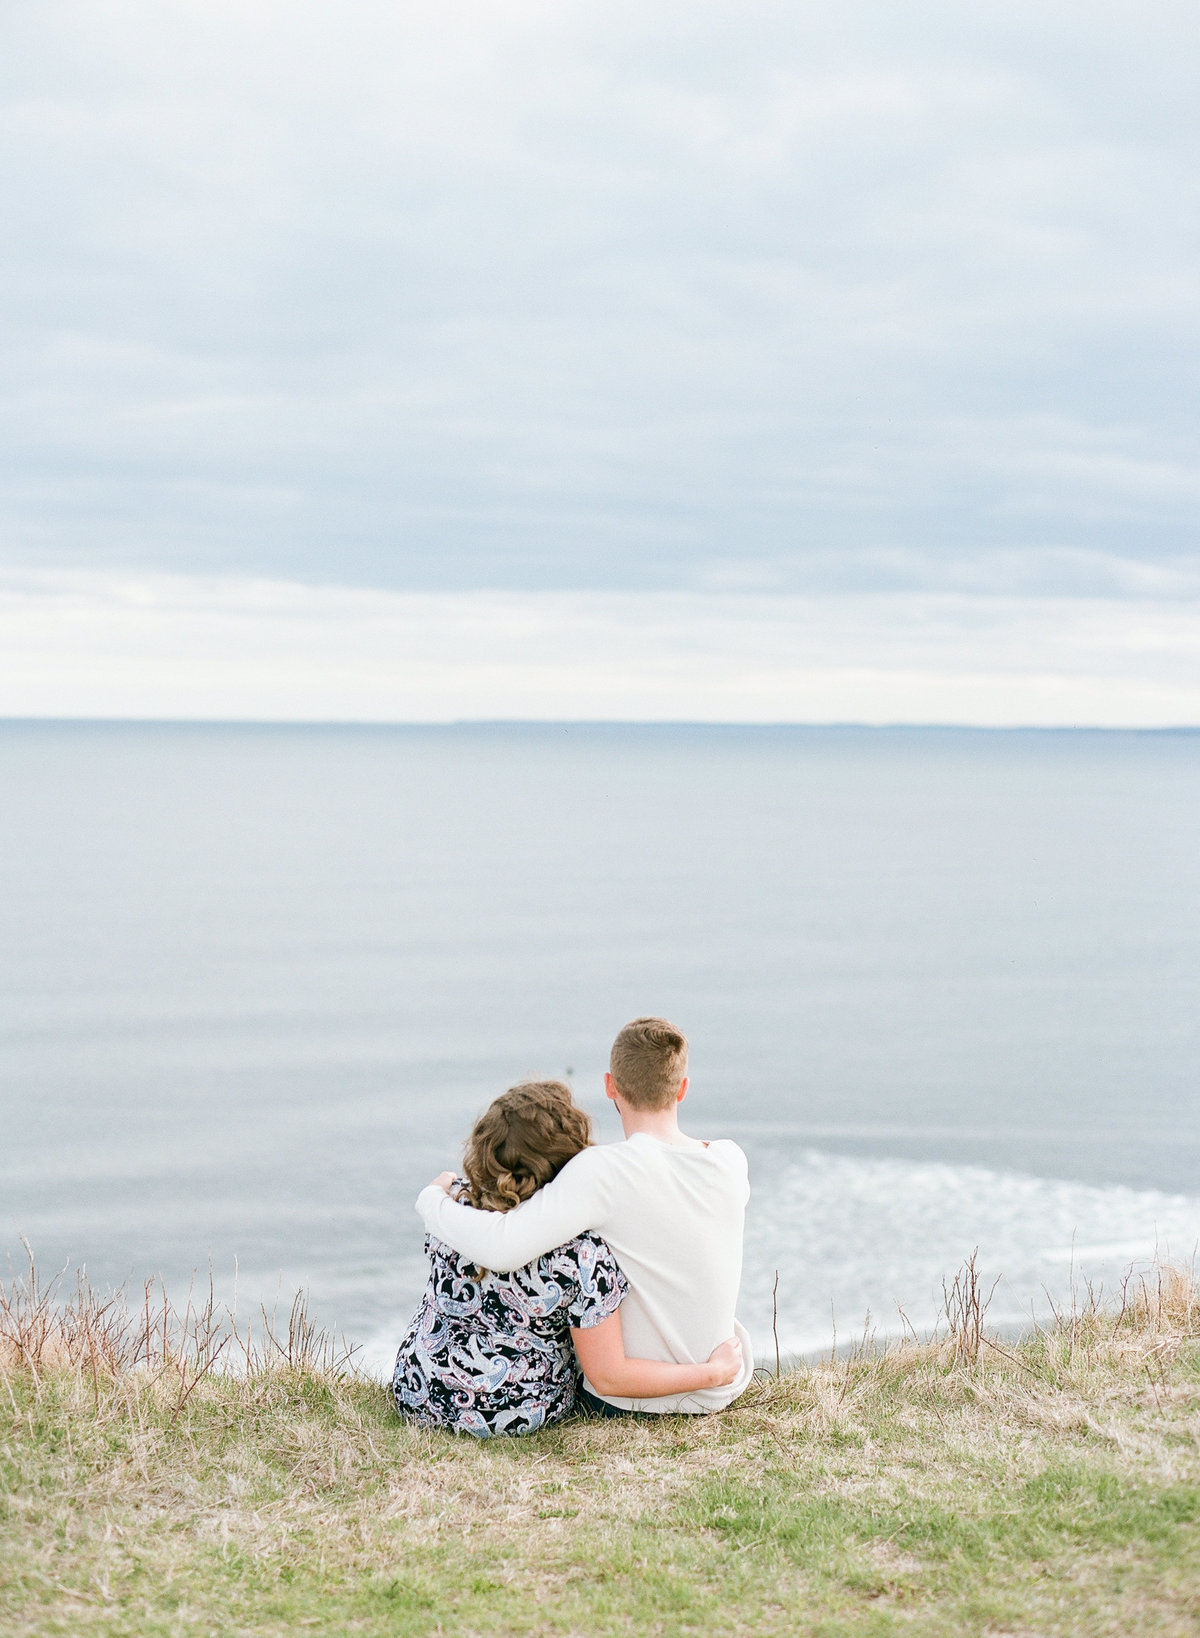 Jacqueline Anne Photography - Akayla and Andrew - Lawrencetown Beach-61